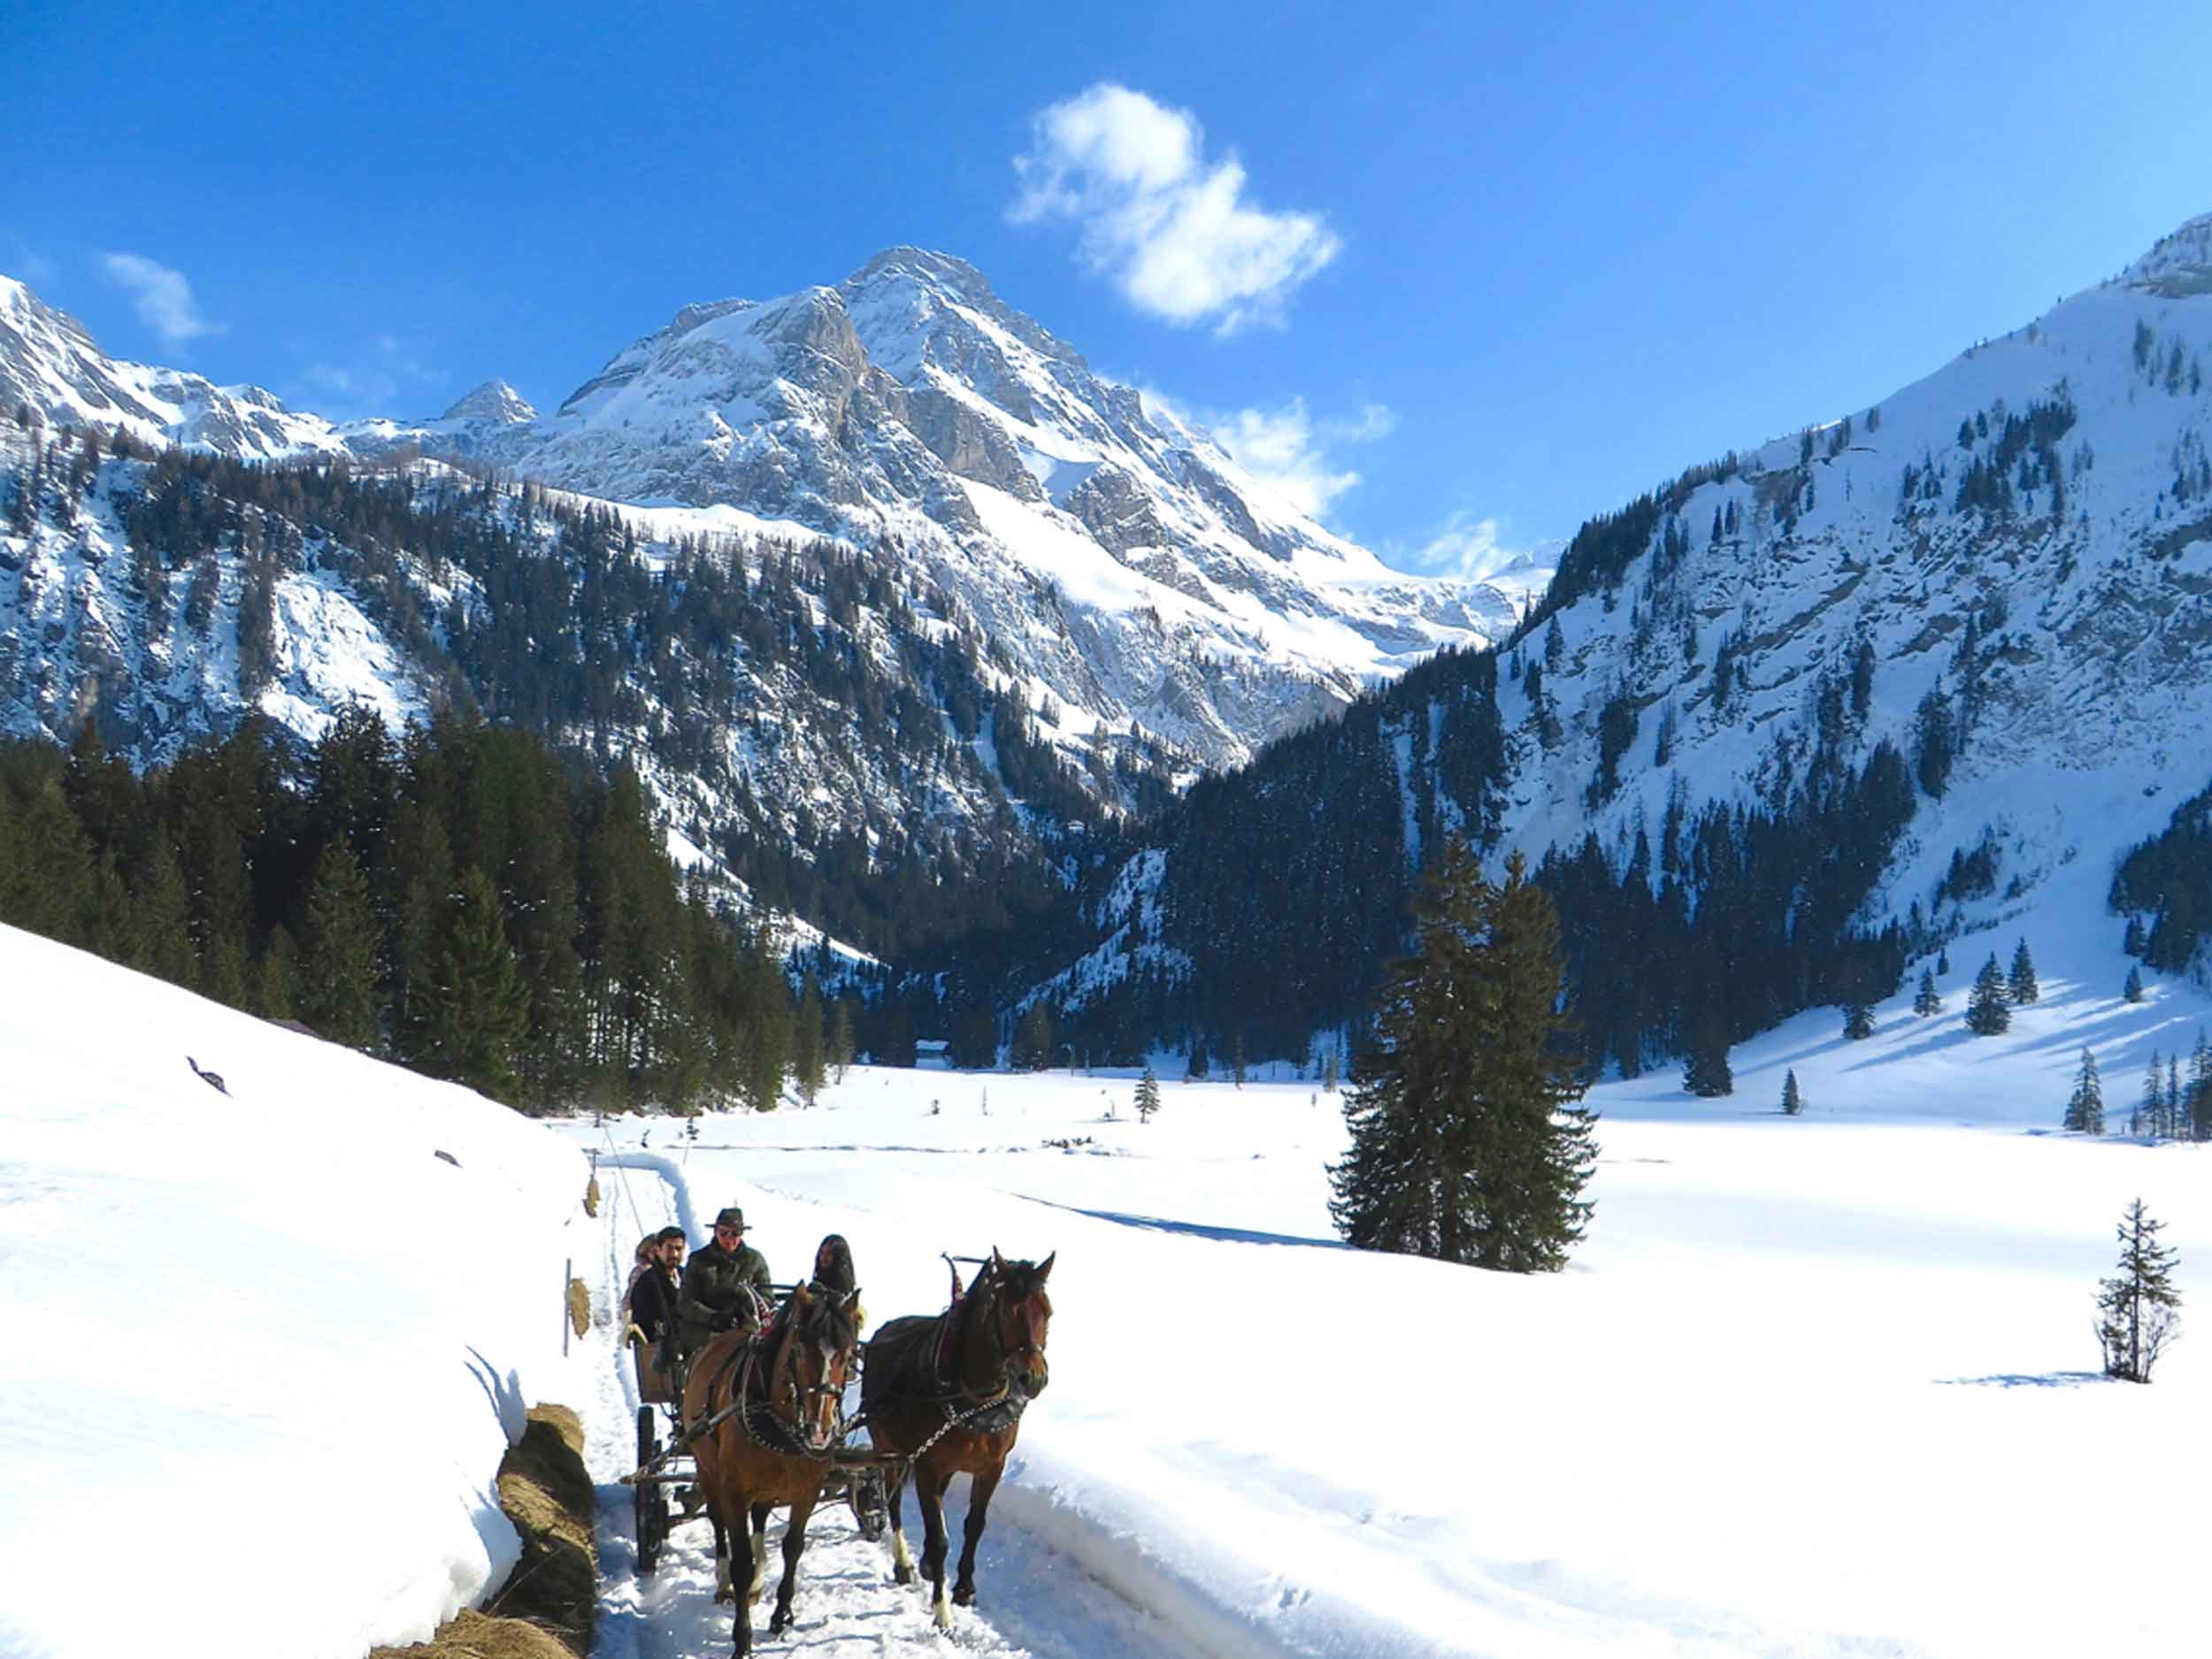 The King of Romance Tour in Switzerland by Erwin Tours of Switzerland-Winter Bollywood Tour with horse carriage